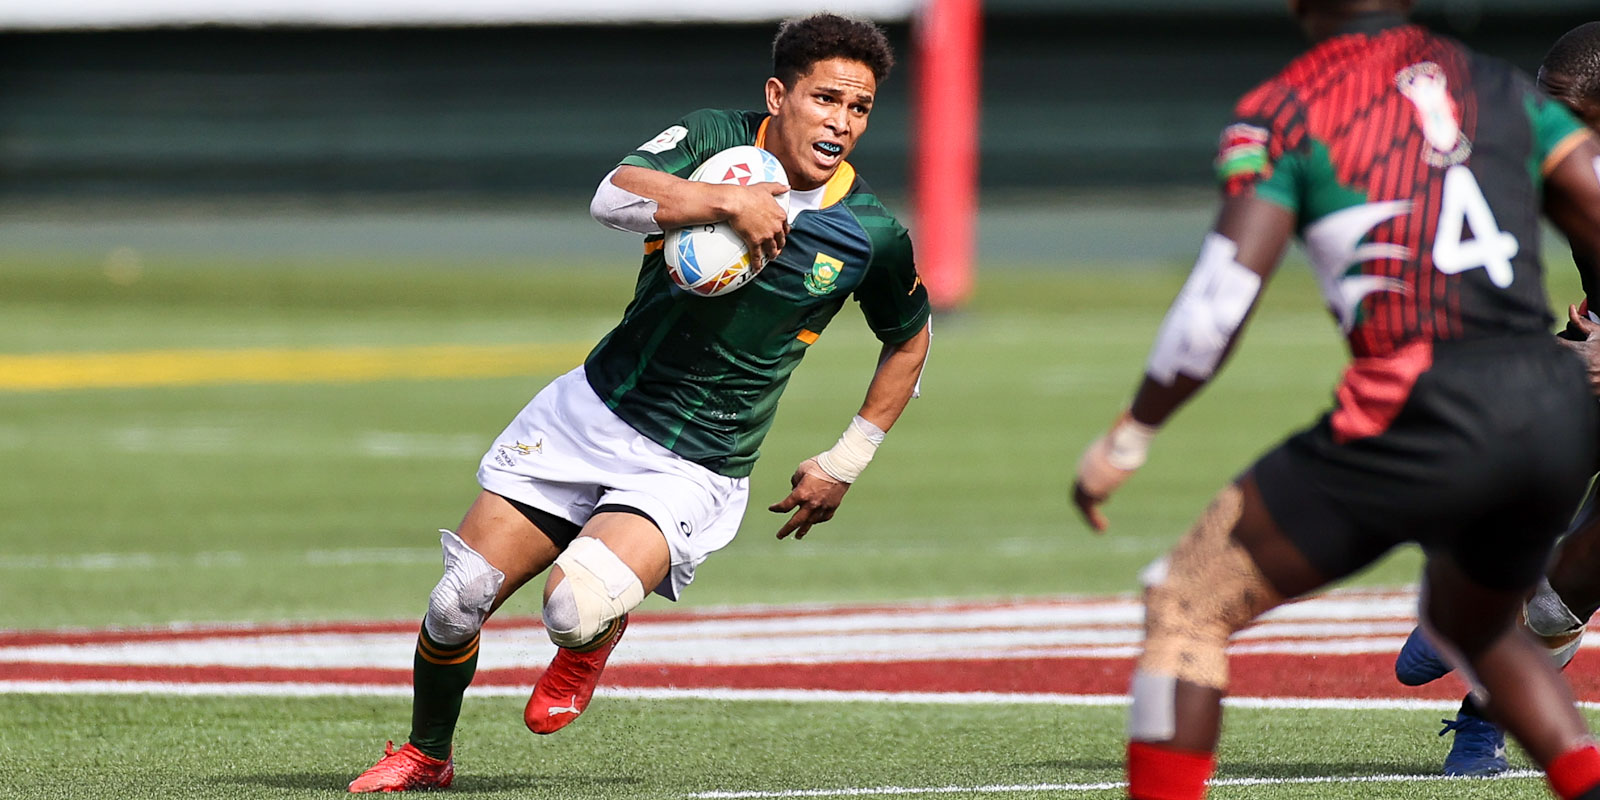 Ronald Brown scored the most points in the HSBC World Rugby Sevens Series in 2021.